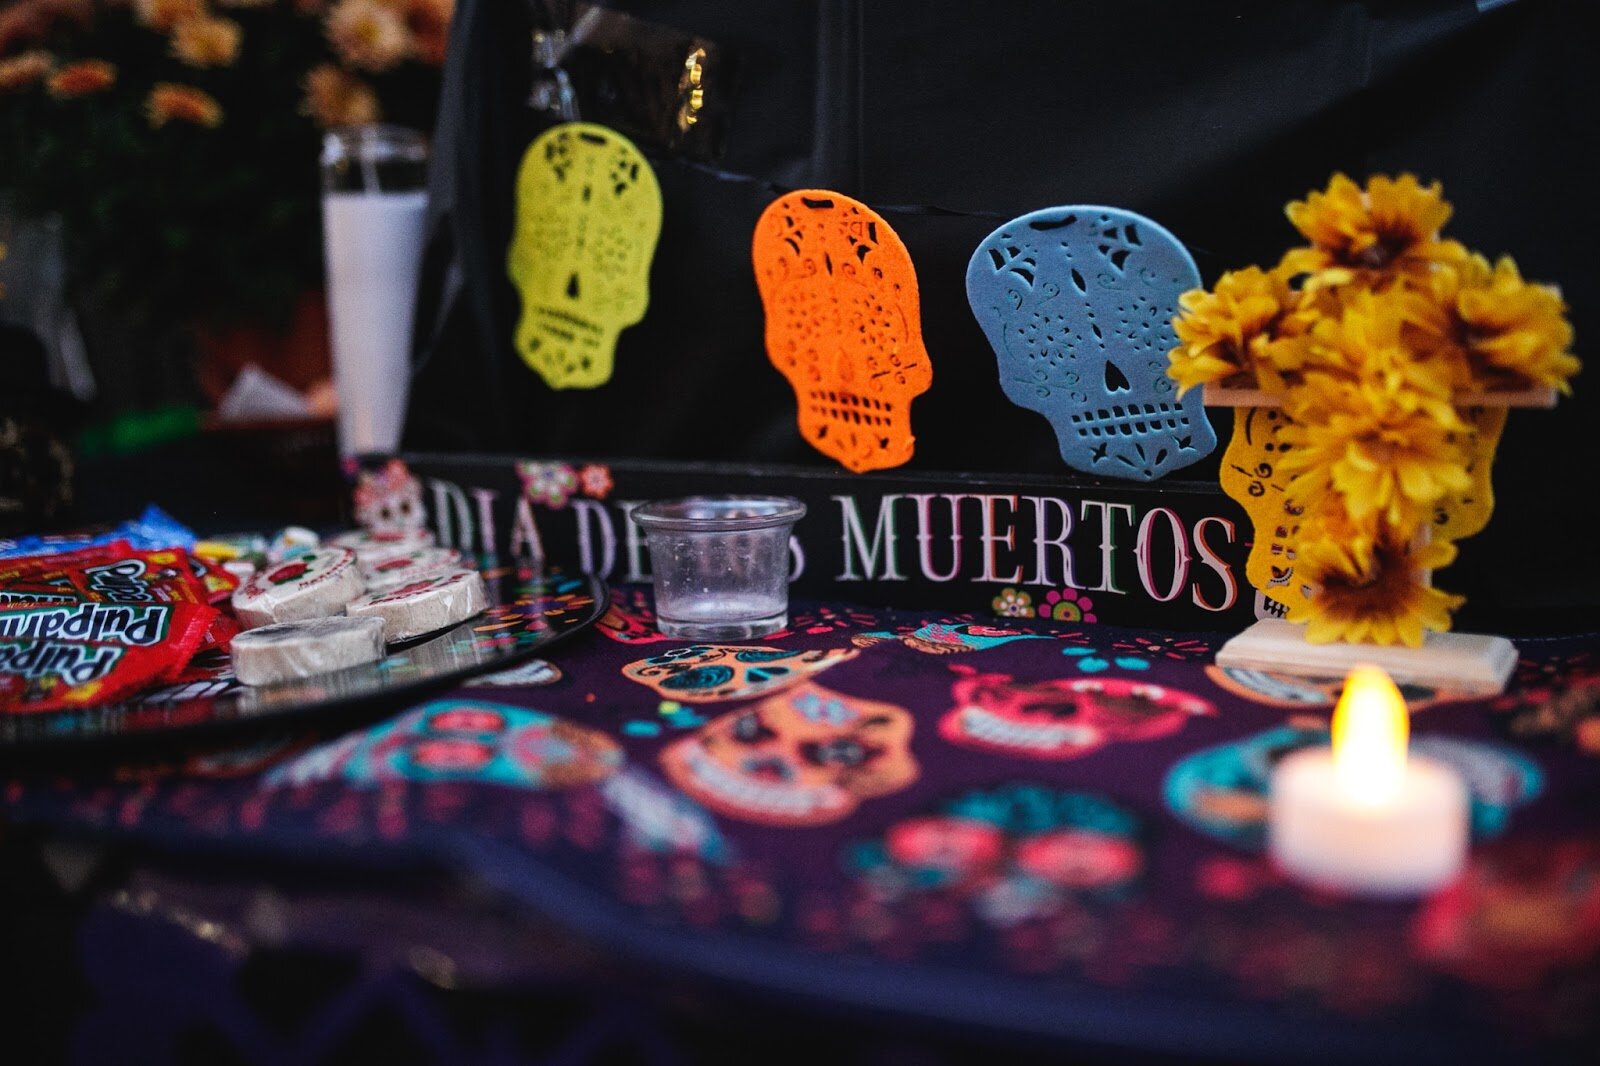 An ofrenda is decorated with traditional ofrenda art during the Latinx Technology and Community Center's Dia de Los Muertos celebration on Wednesday, Nov. 2, 2022 in downtown Flint.